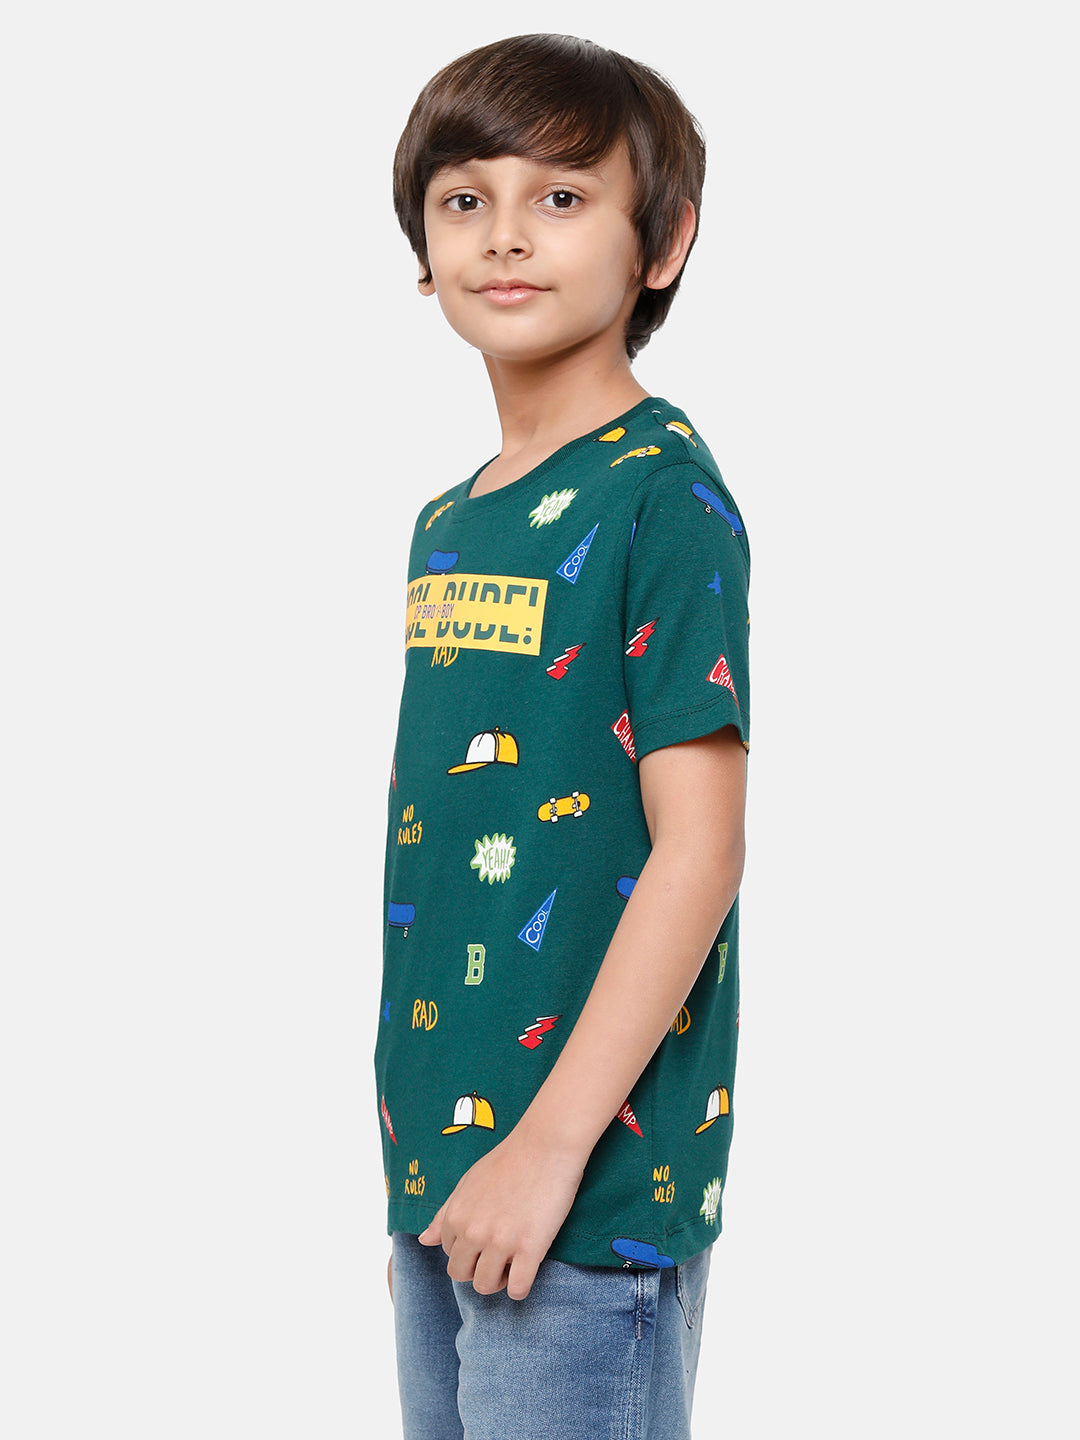 CP Boys Green Printed Slim Fit Round Neck T-Shirt T-shirt Classic Polo 